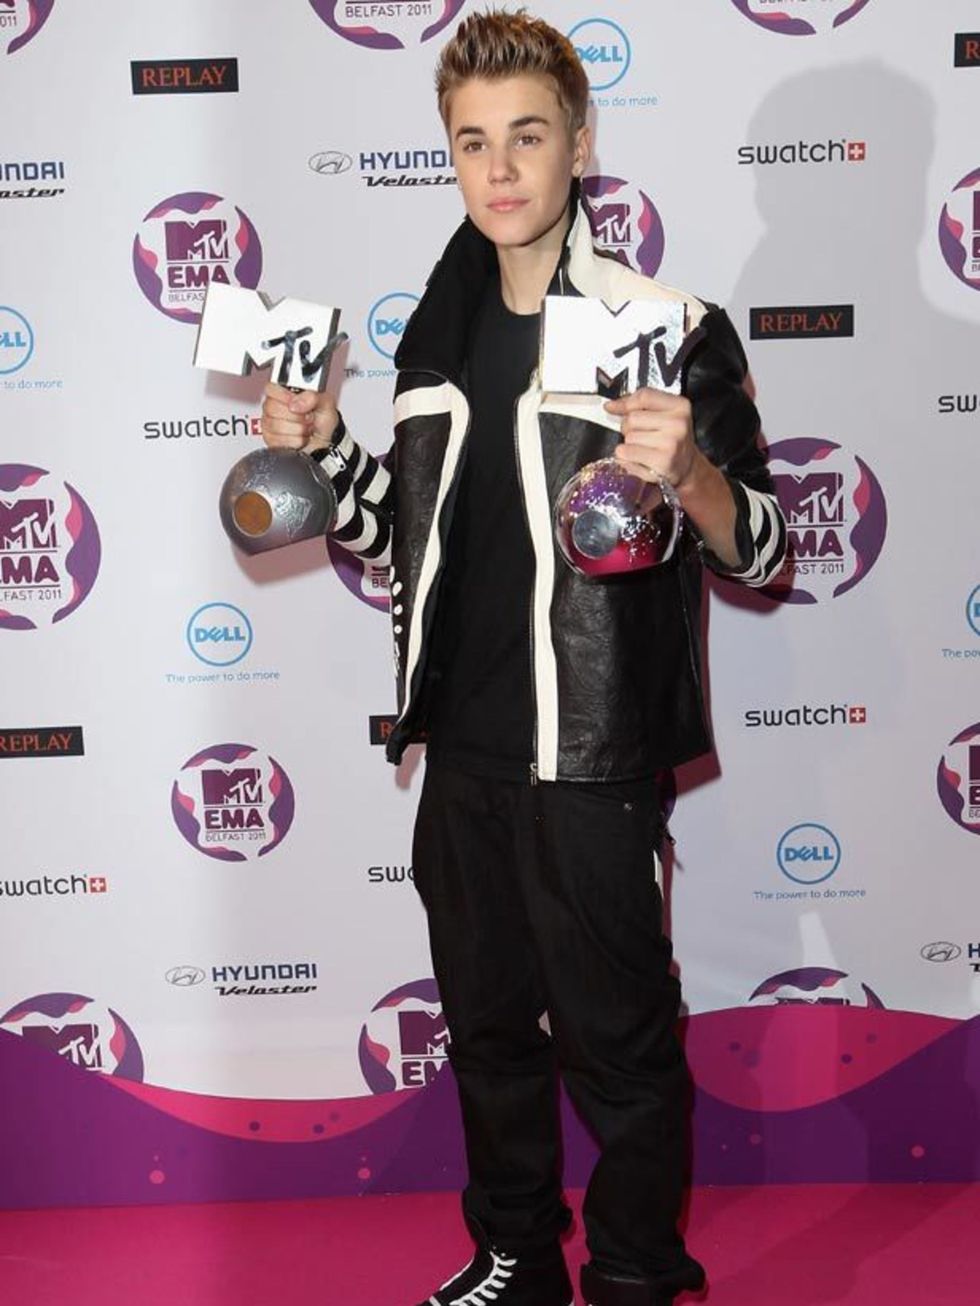 <p><a href="http://www.elleuk.com/content/search?SearchText=Justin+Bieber&amp;SearchButton=Search">Justin Bieber</a> walked away with two awards wearing his signature high top sneakers at the MTV Europe Music Awards, 6 November 2011</p>